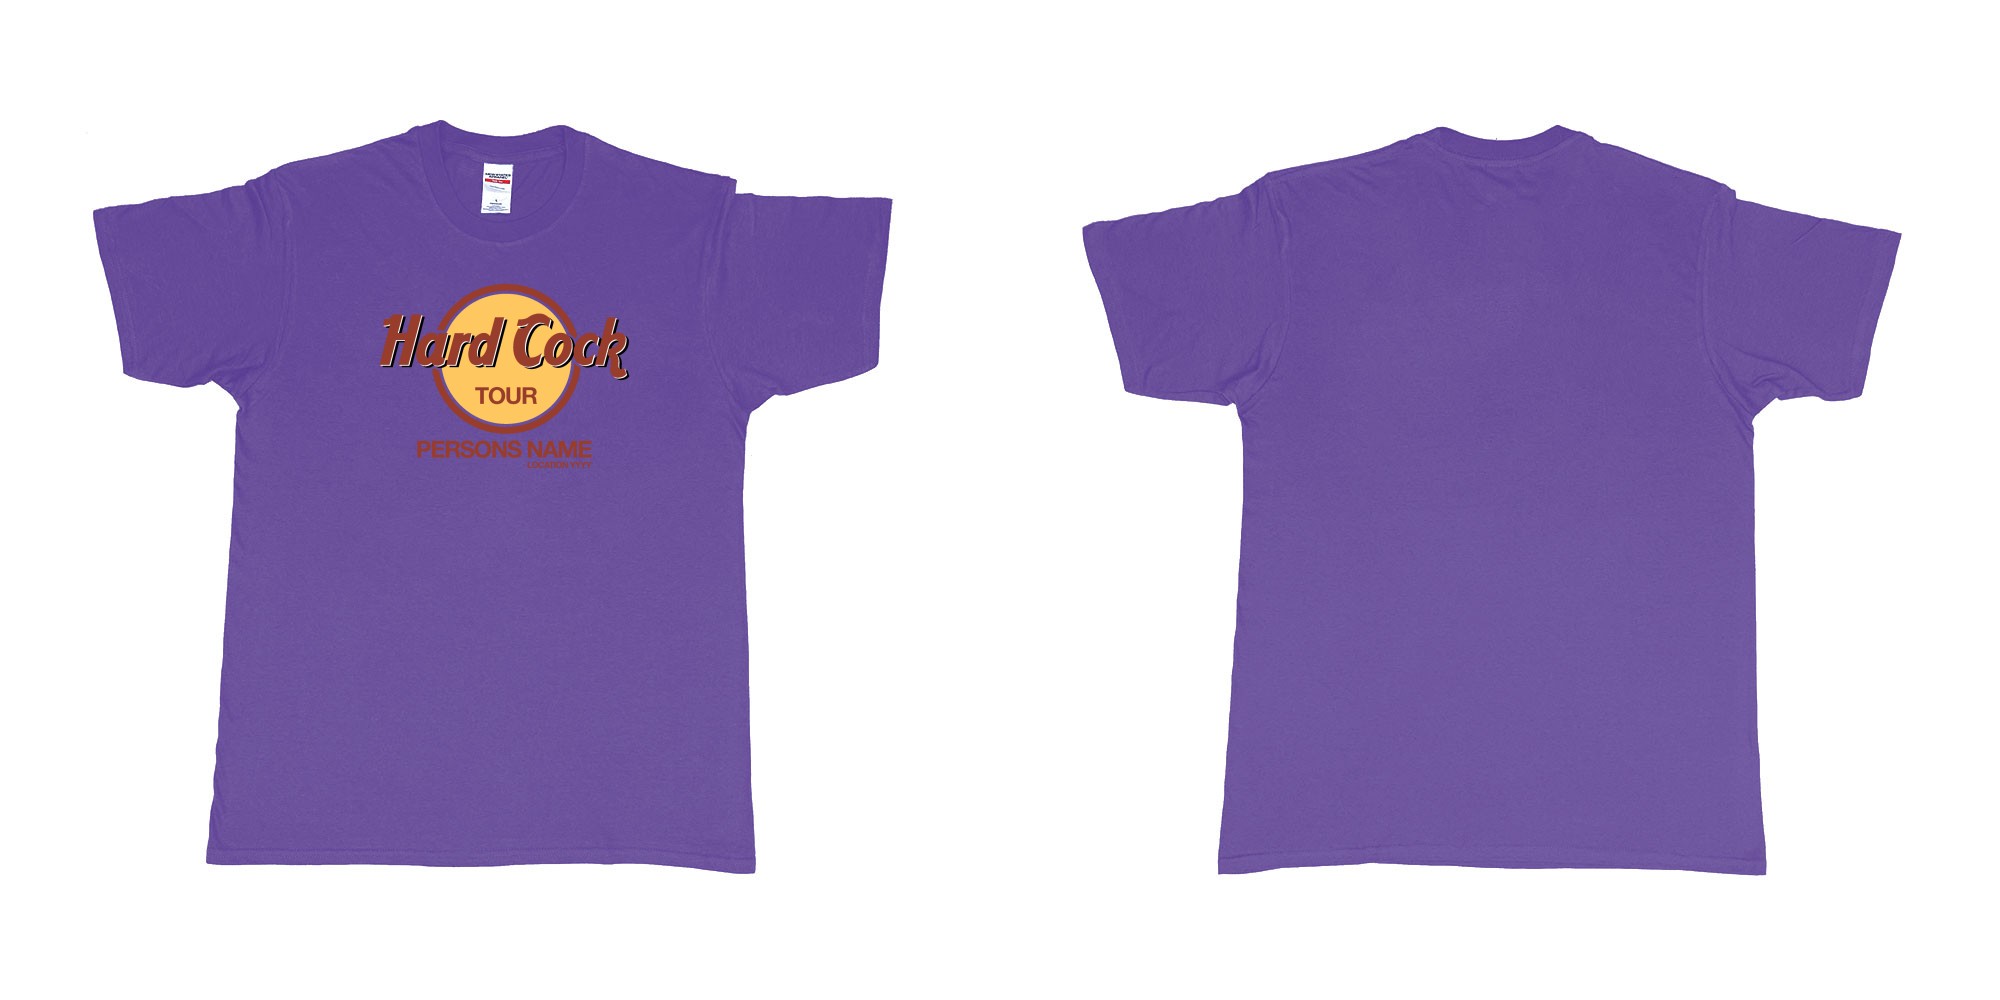 Custom tshirt design Hard Rock Cock in fabric color purple choice your own text made in Bali by The Pirate Way